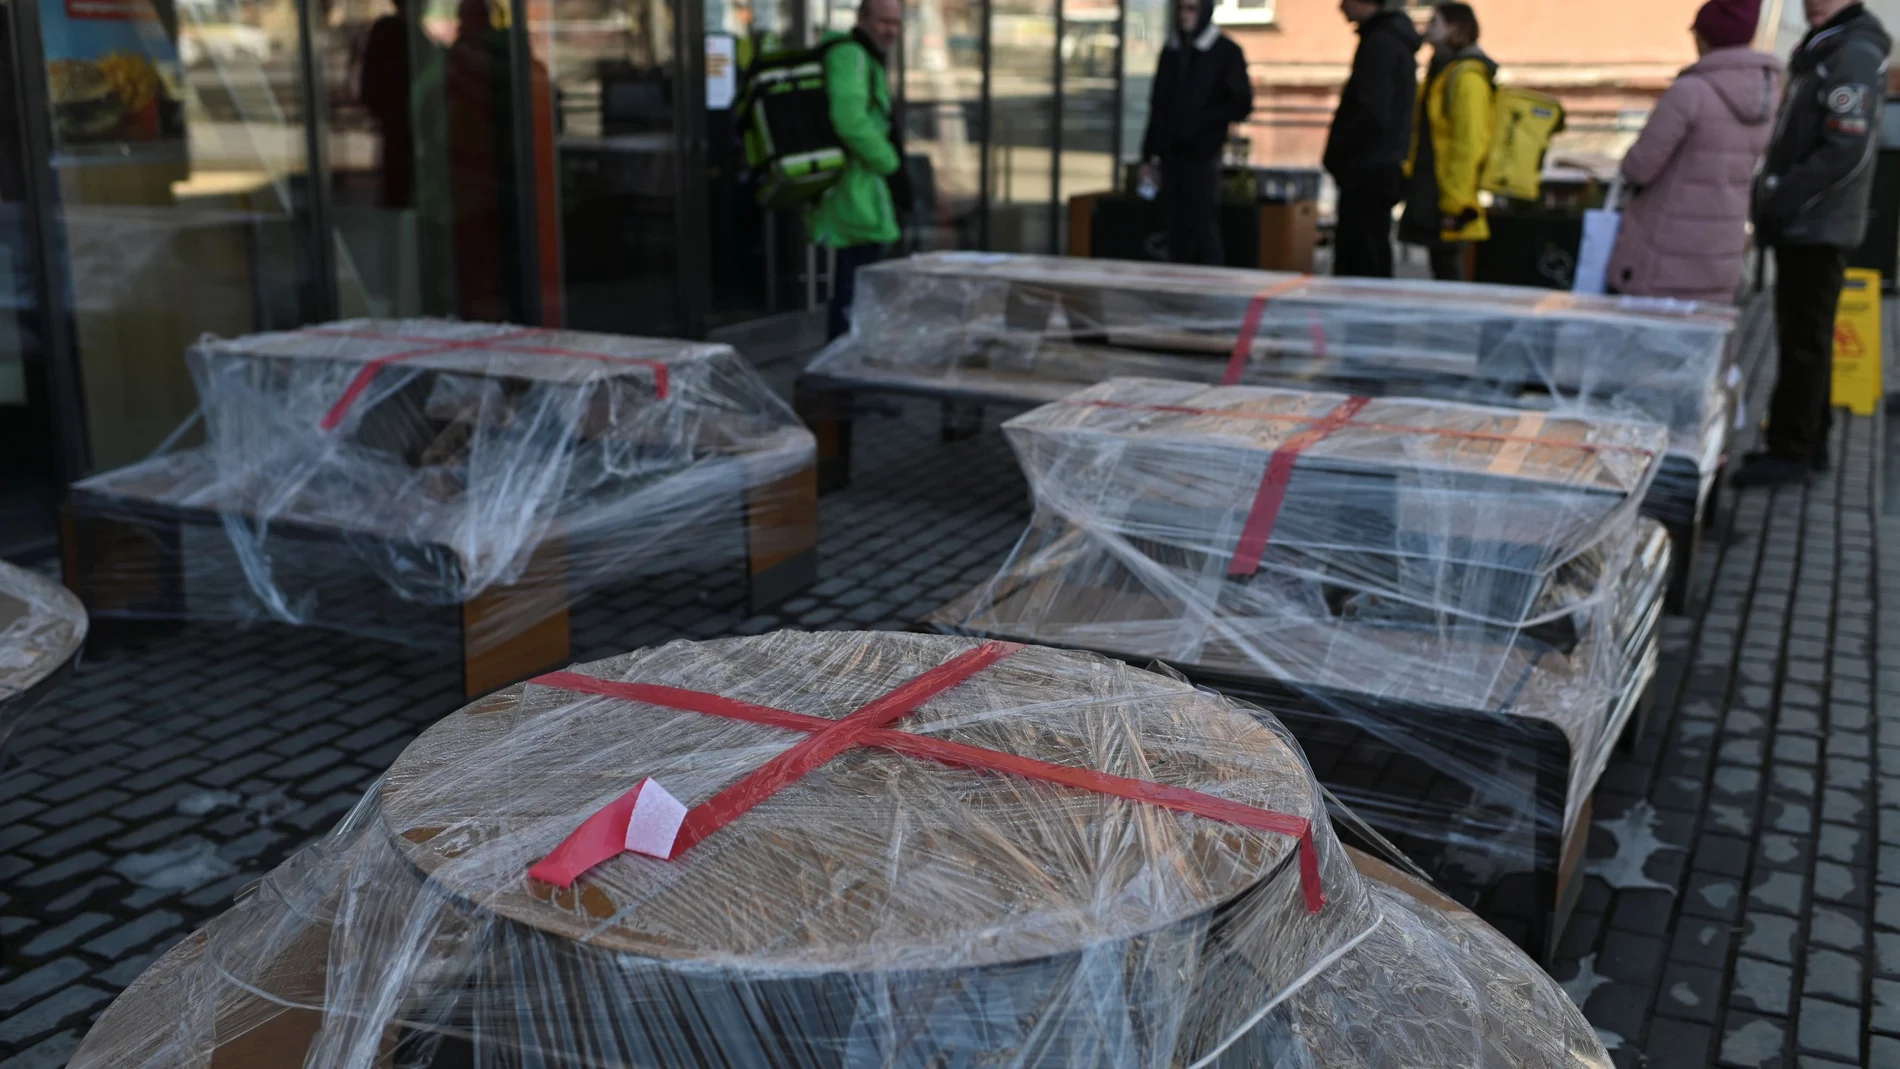 People gather near polythene-wrapped tables outside a McDonald's restaurant in Omsk